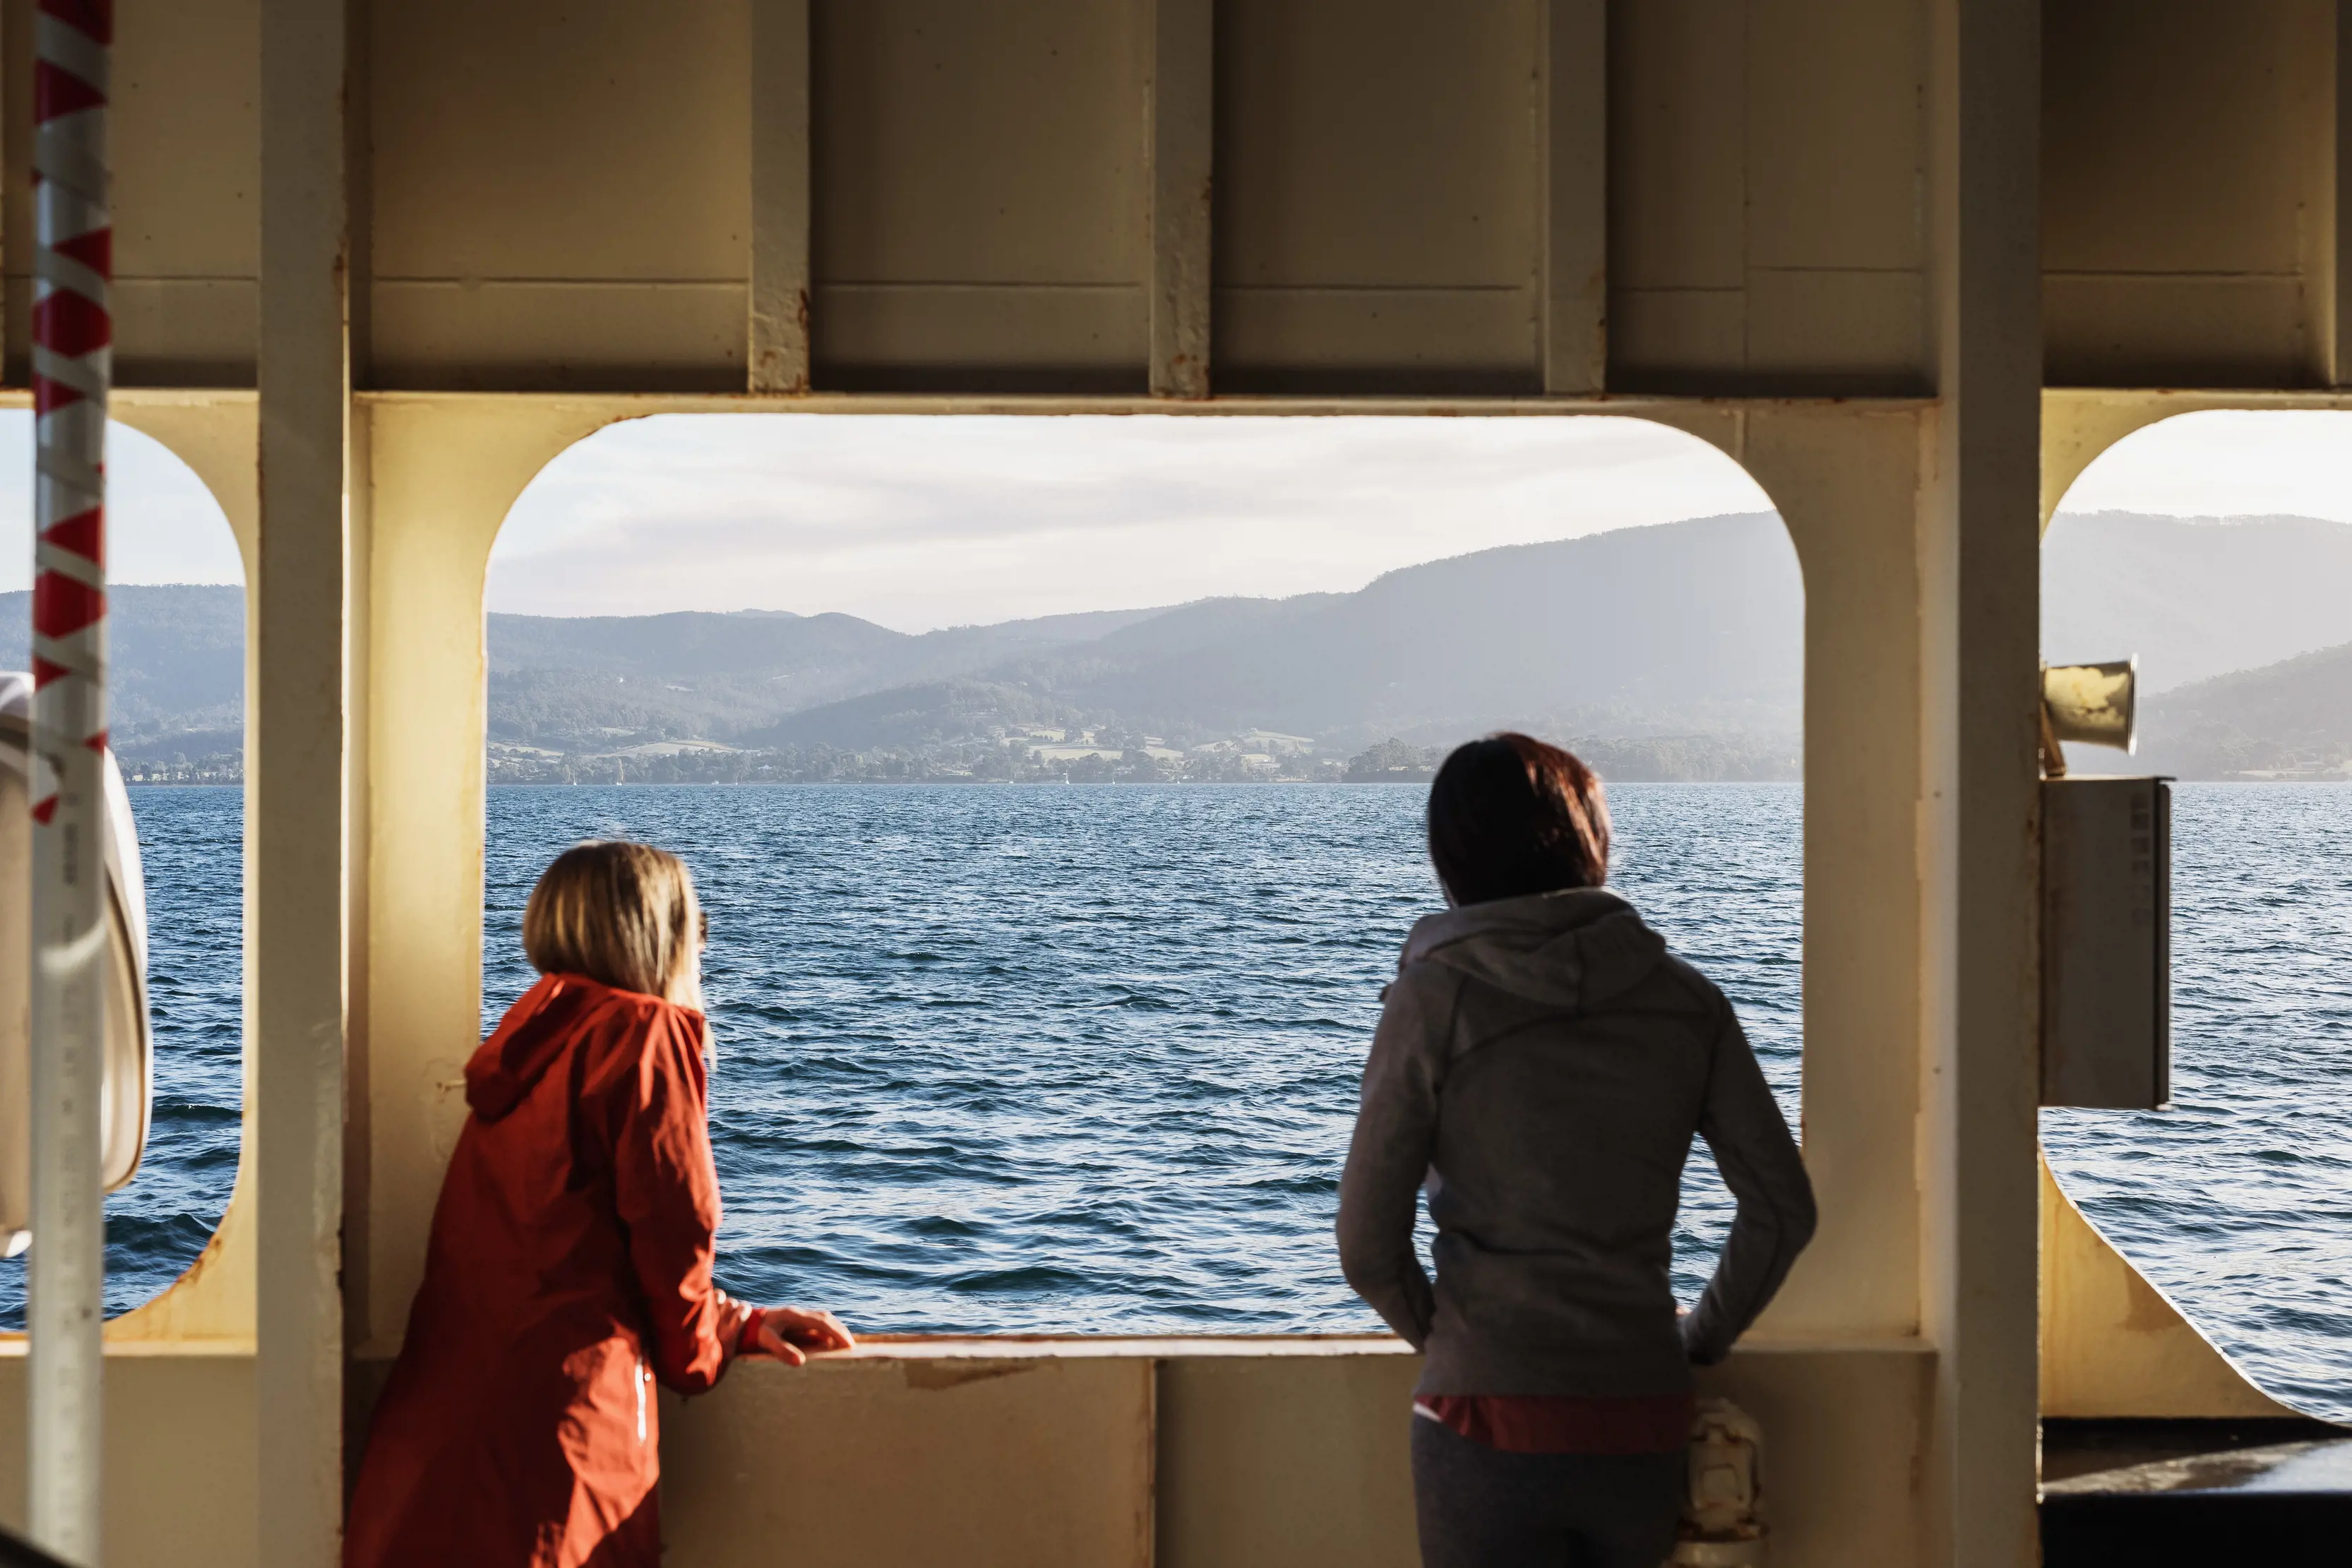 Two people look out over the waters of the D'Entrecasteaux Channel while riding The Bruny Island Ferry.